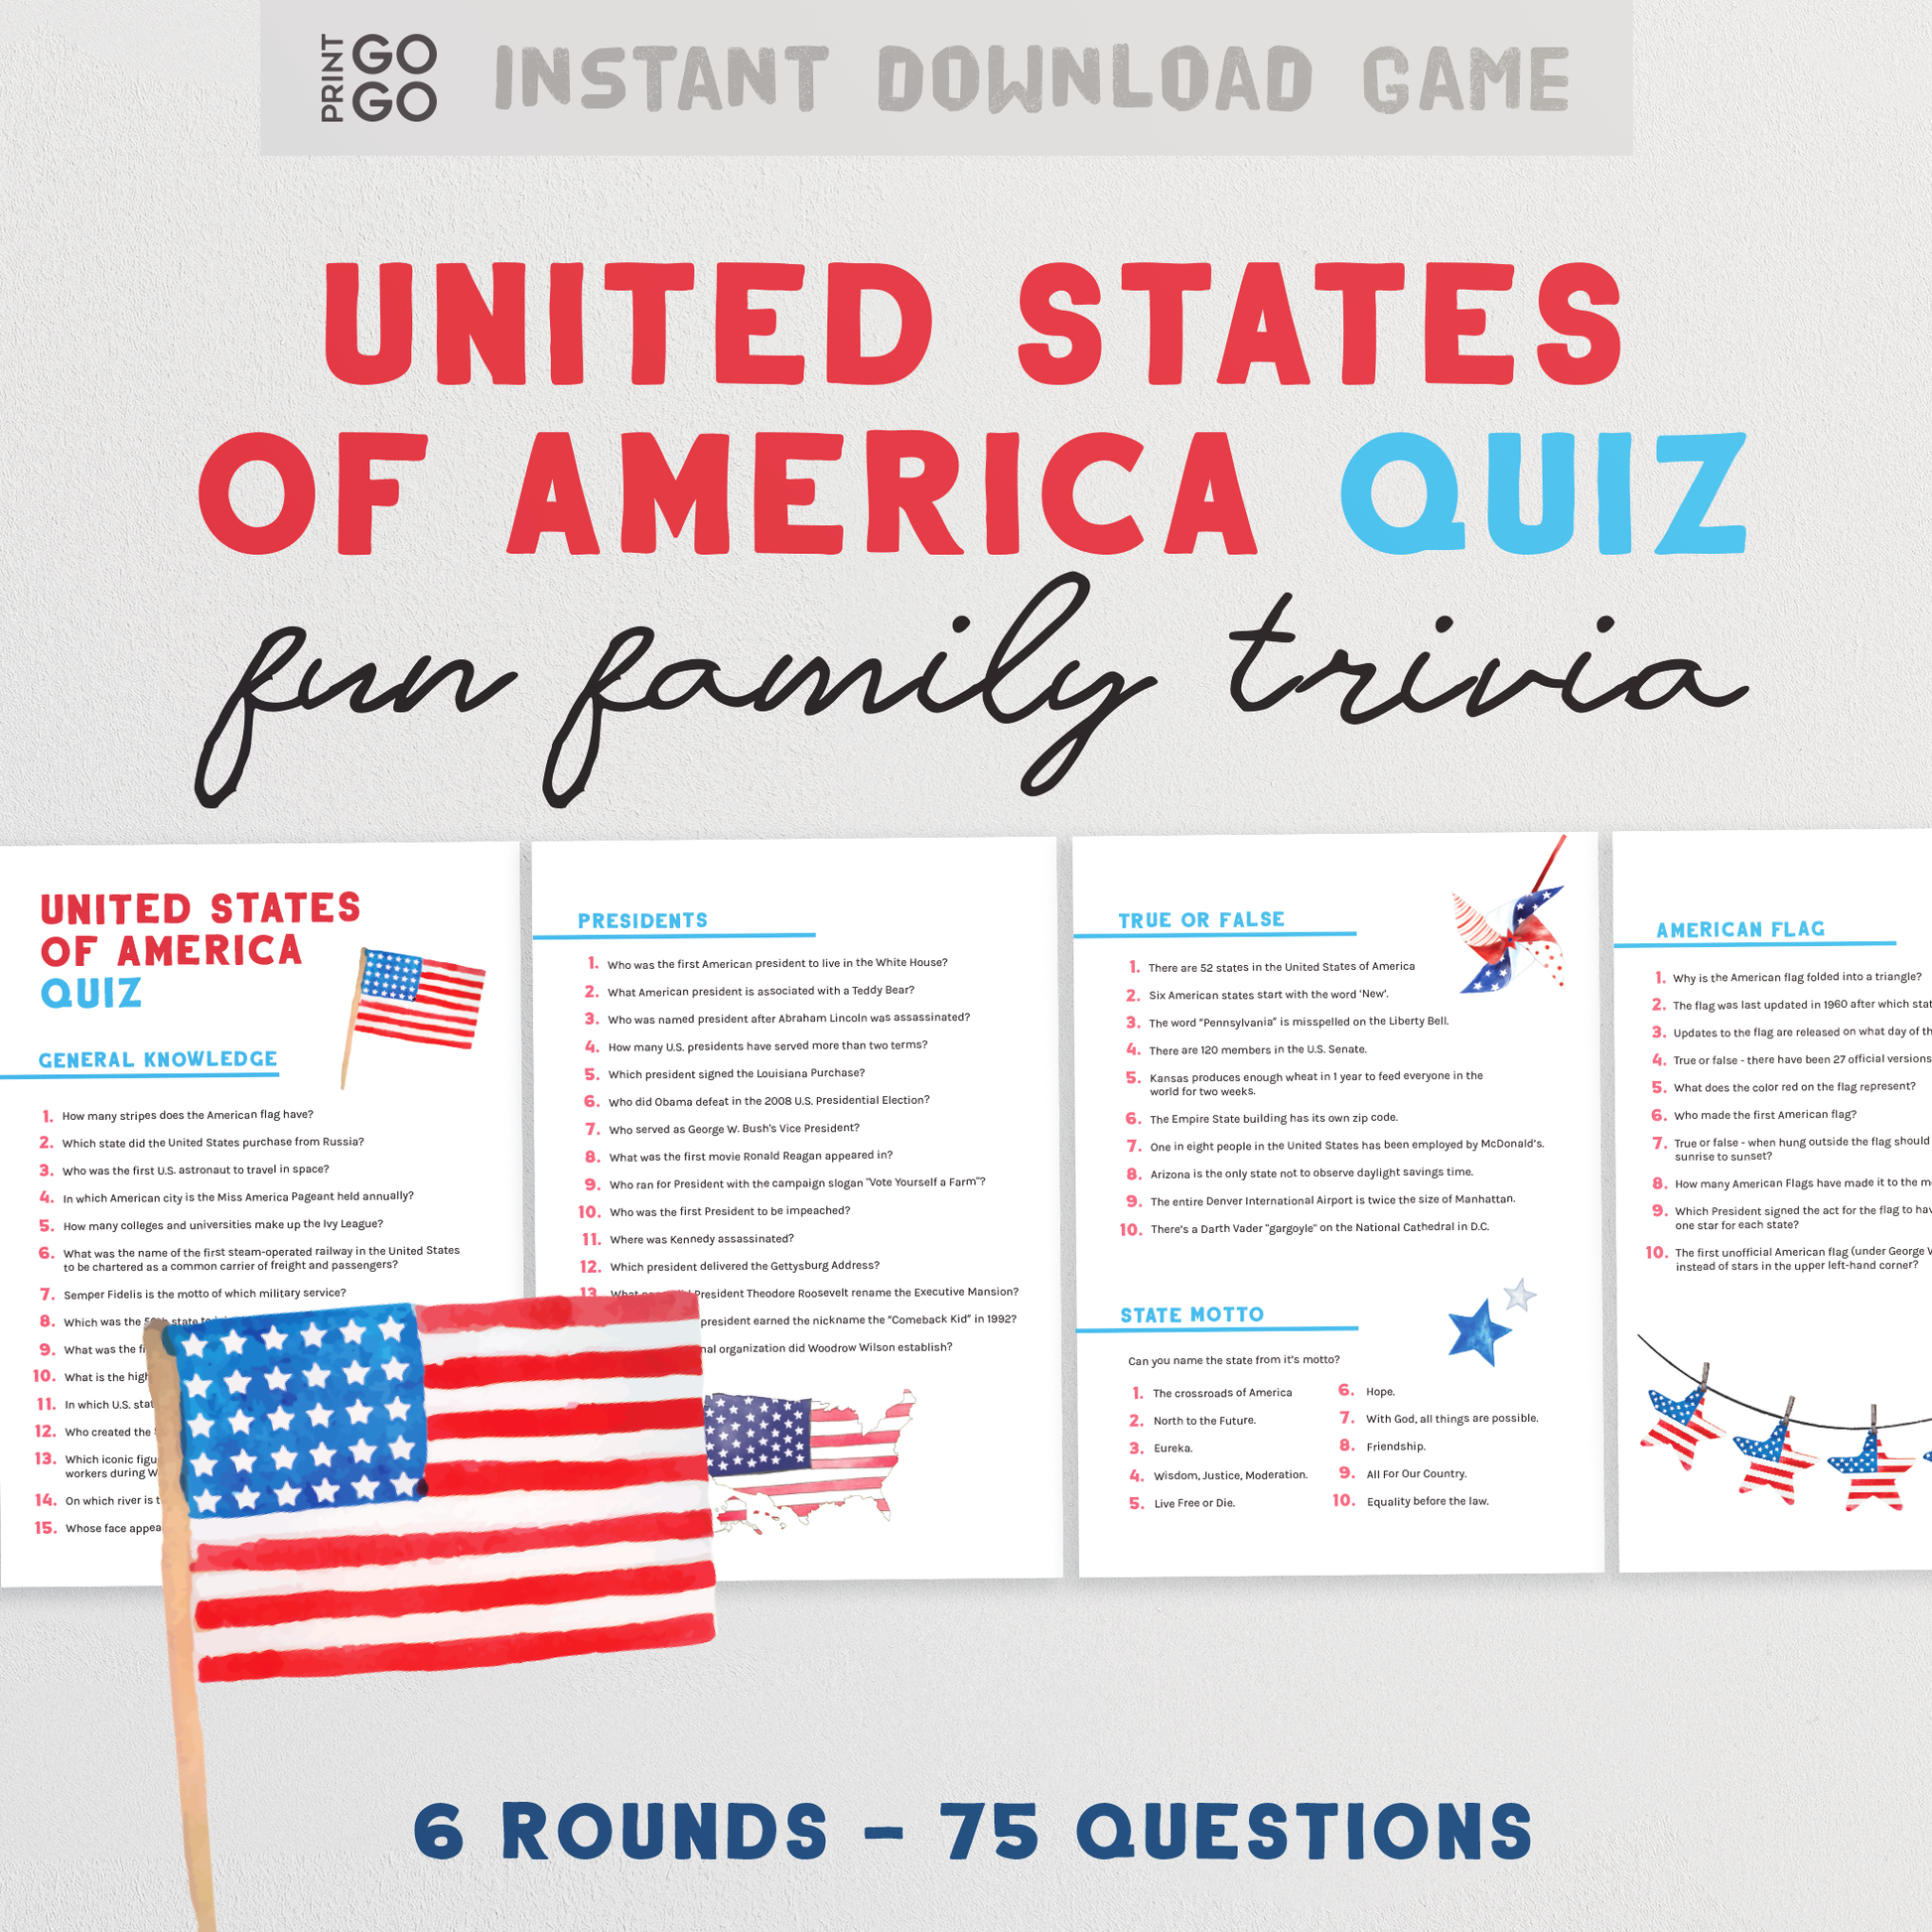 United States of America Trivia Quiz - 75 Questions to Test Everyone's General Knowledge